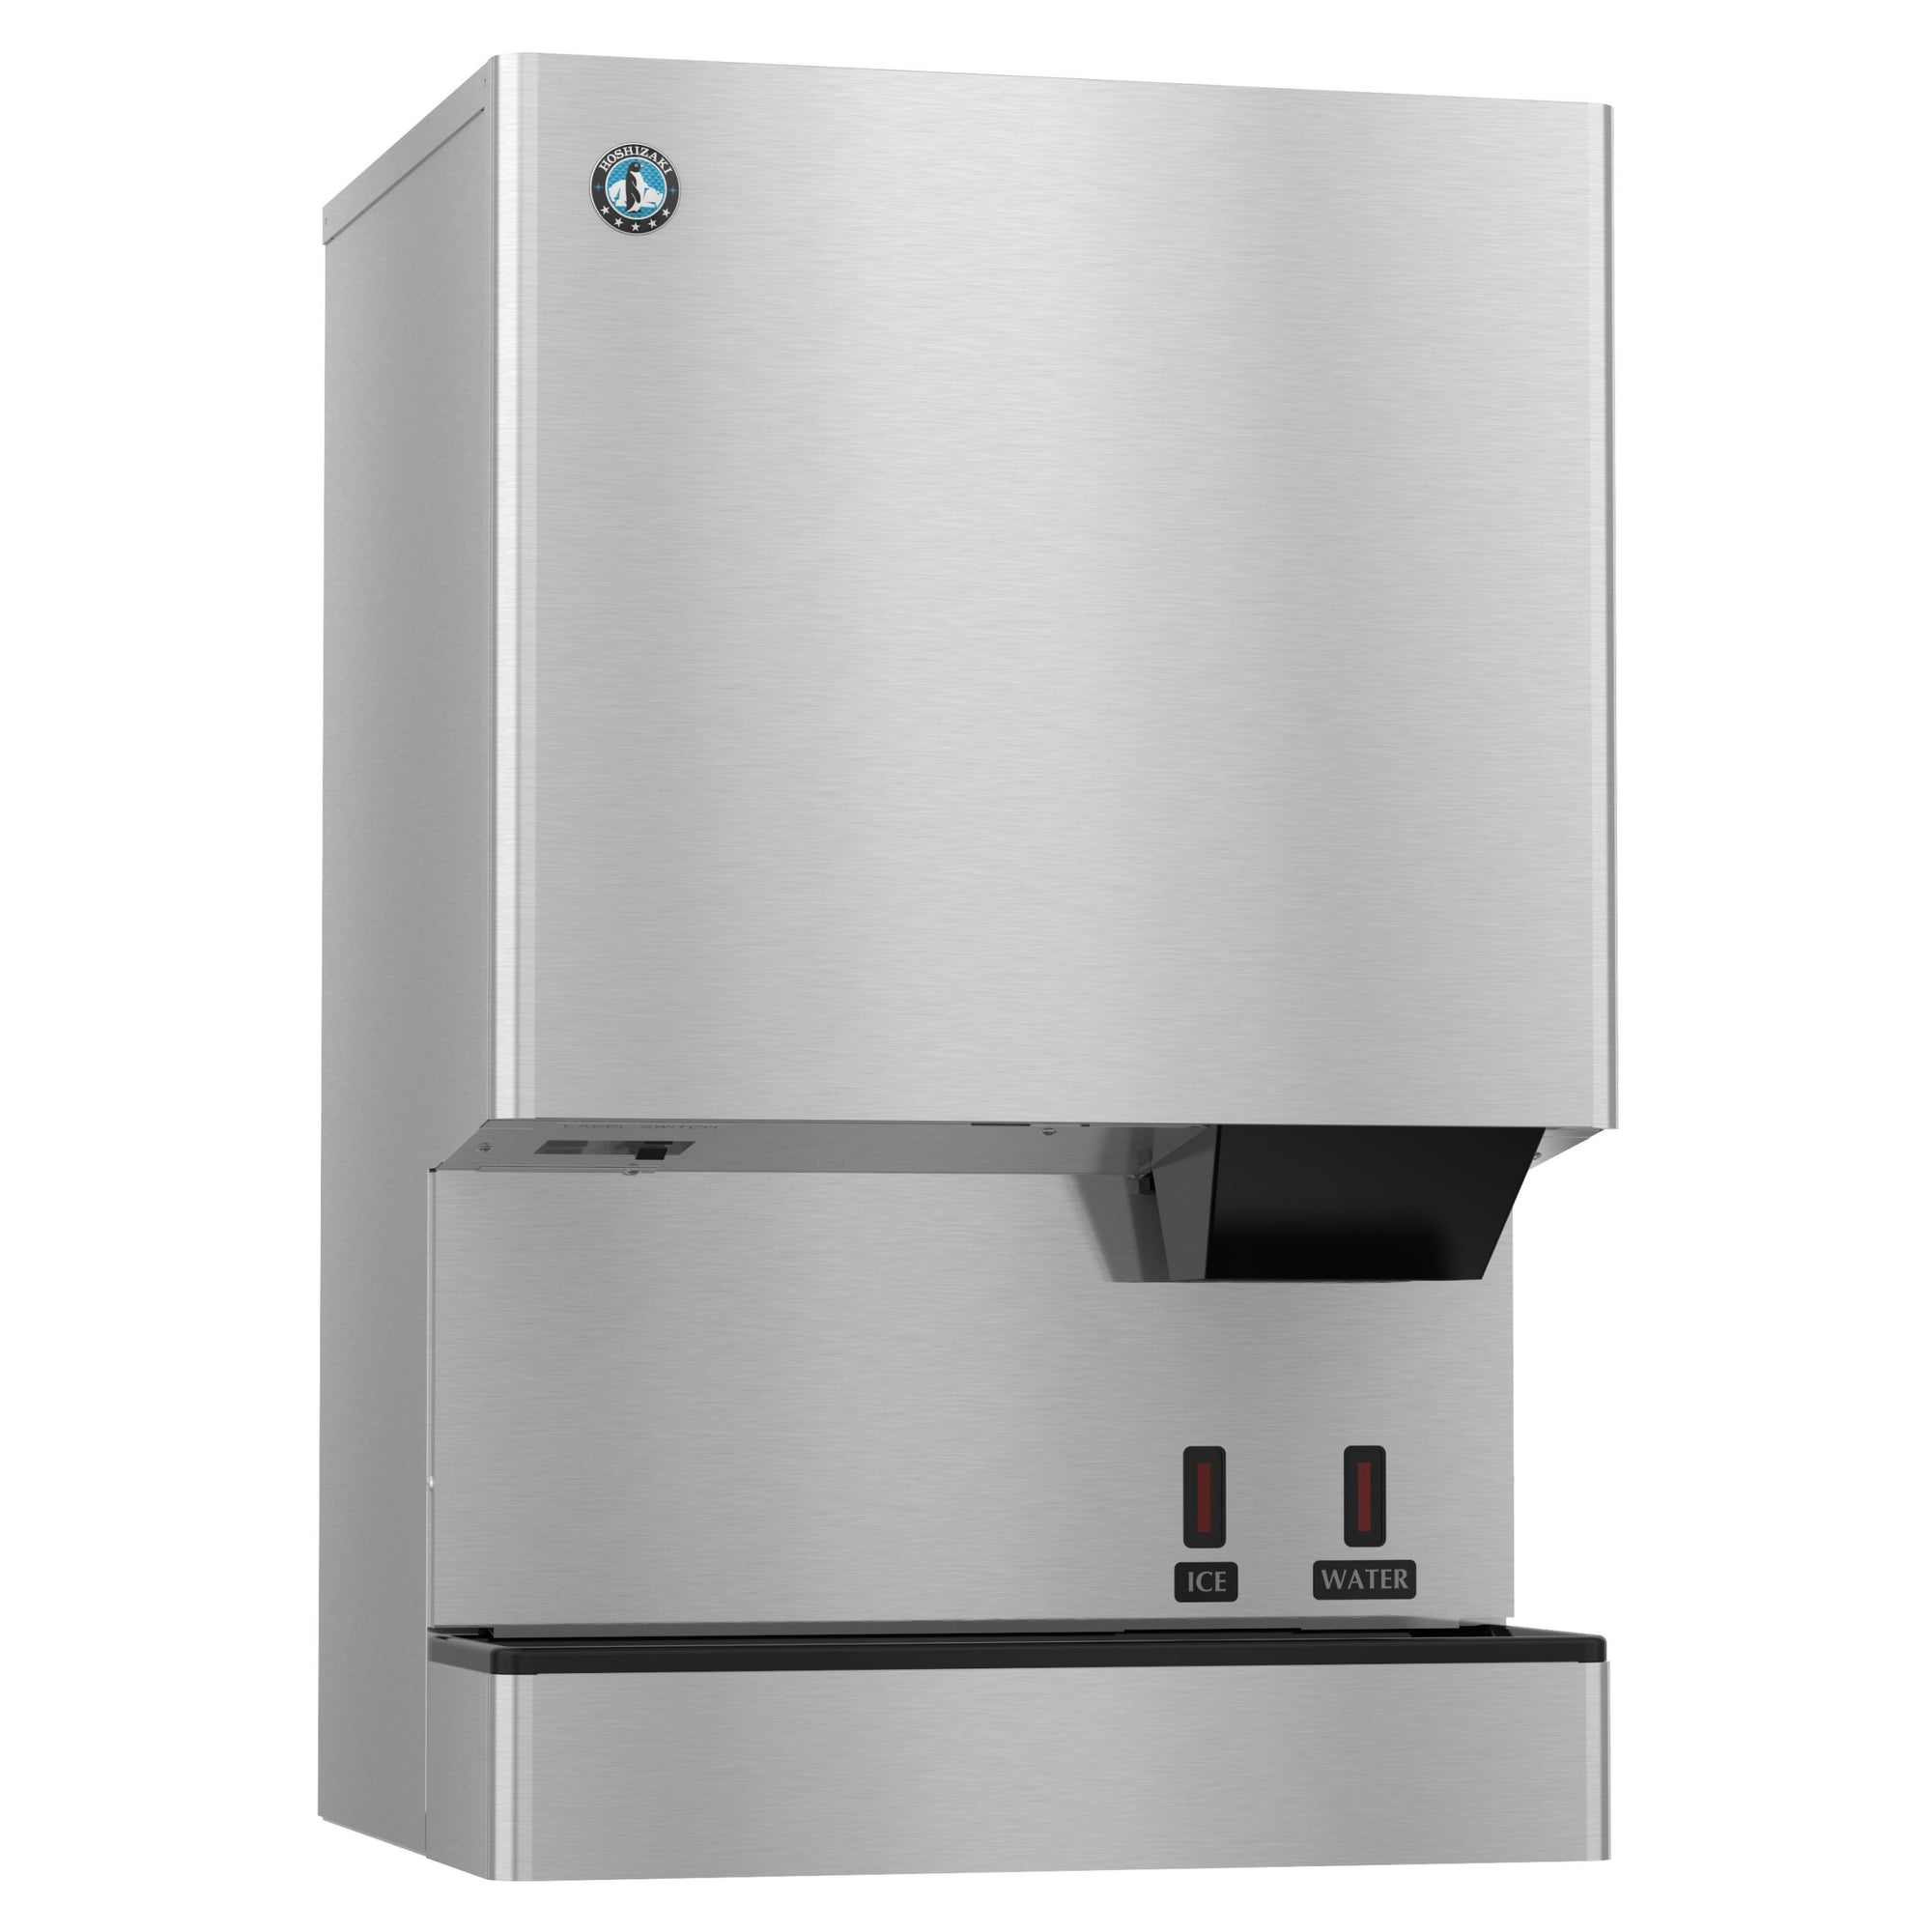 Hoshizaki DCM-500BWH-OS | OptiServe Hands Free Cubelet Ice and Water Dispenser, Water-cooled, 40 lbs capacity